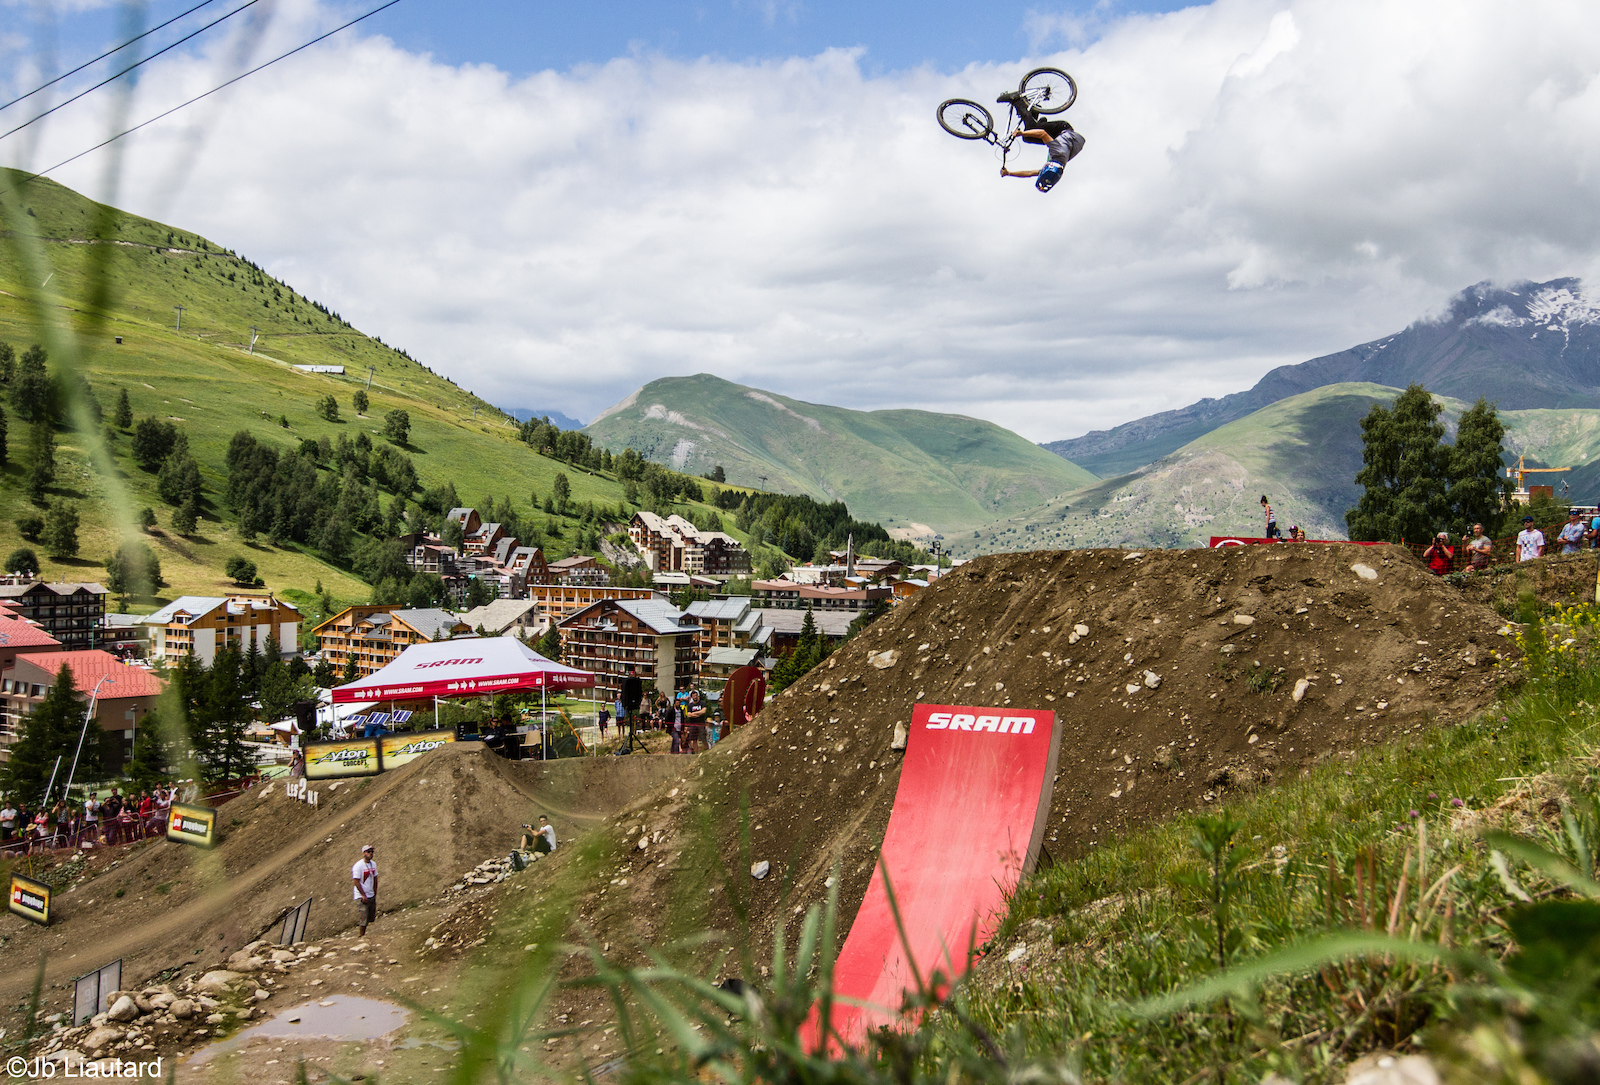 Anthony messere sended huge flatspins before his race runs on the slopestyle track.